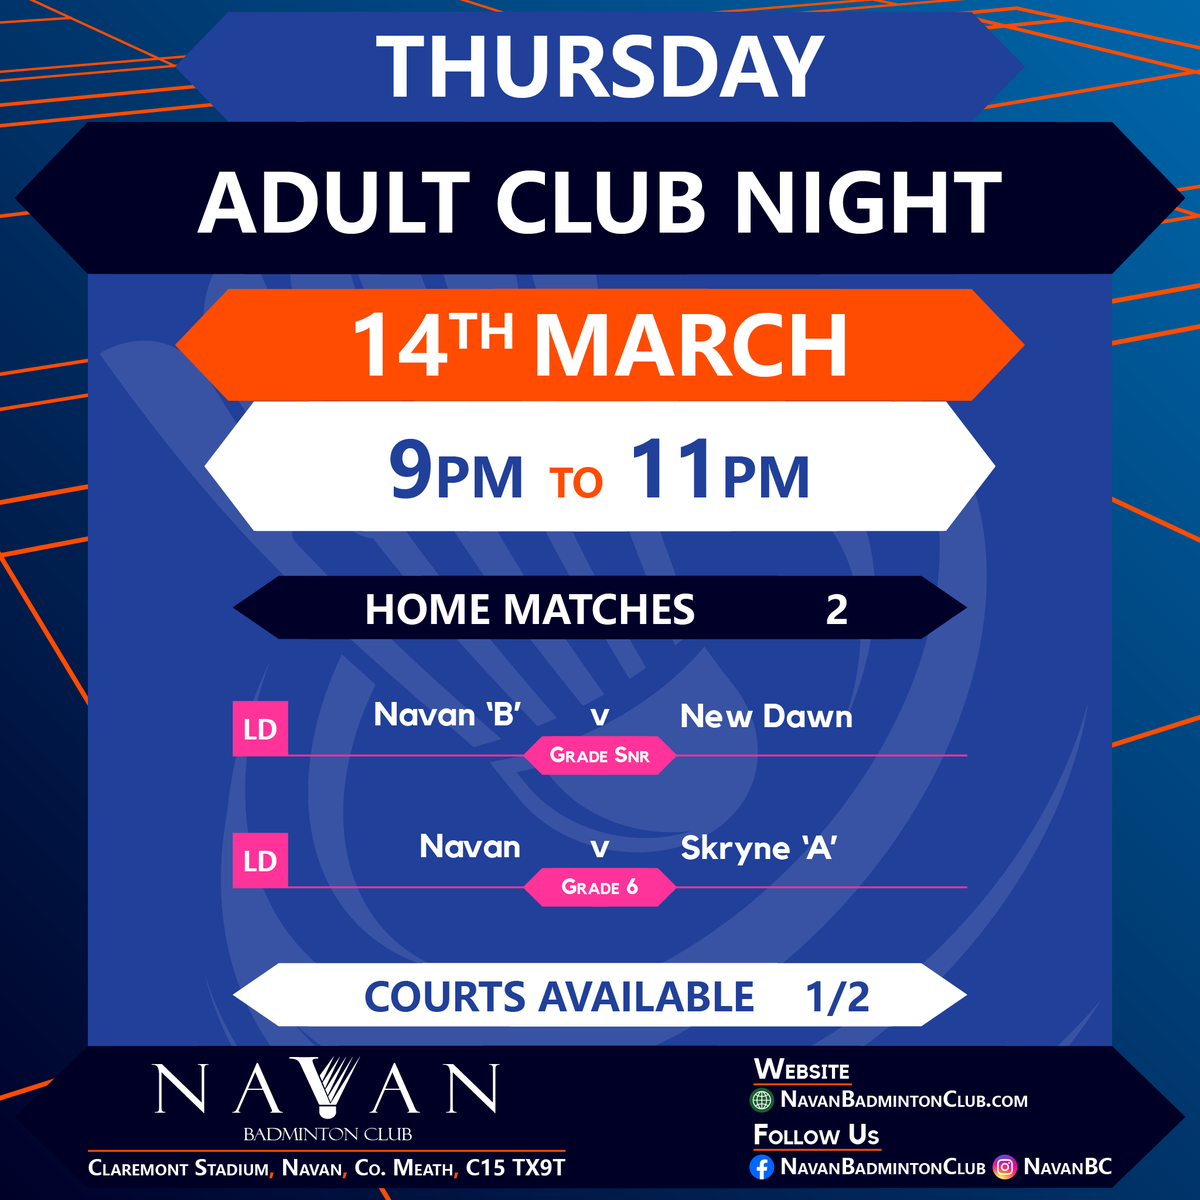 #THURSDAY #ClubNight | 14th Mar | 9pm-11pm | #ClaremontStadium #Navan #Meath #Ireland

Hear ye! Tonight, our #badminton hall transforms into a medieval arena, where shuttle knights shall duel in fierce matches!

#BWFWorldTour #YAE24 #AllOfBadminton #AllEngland2024 #FrenchOpen2024